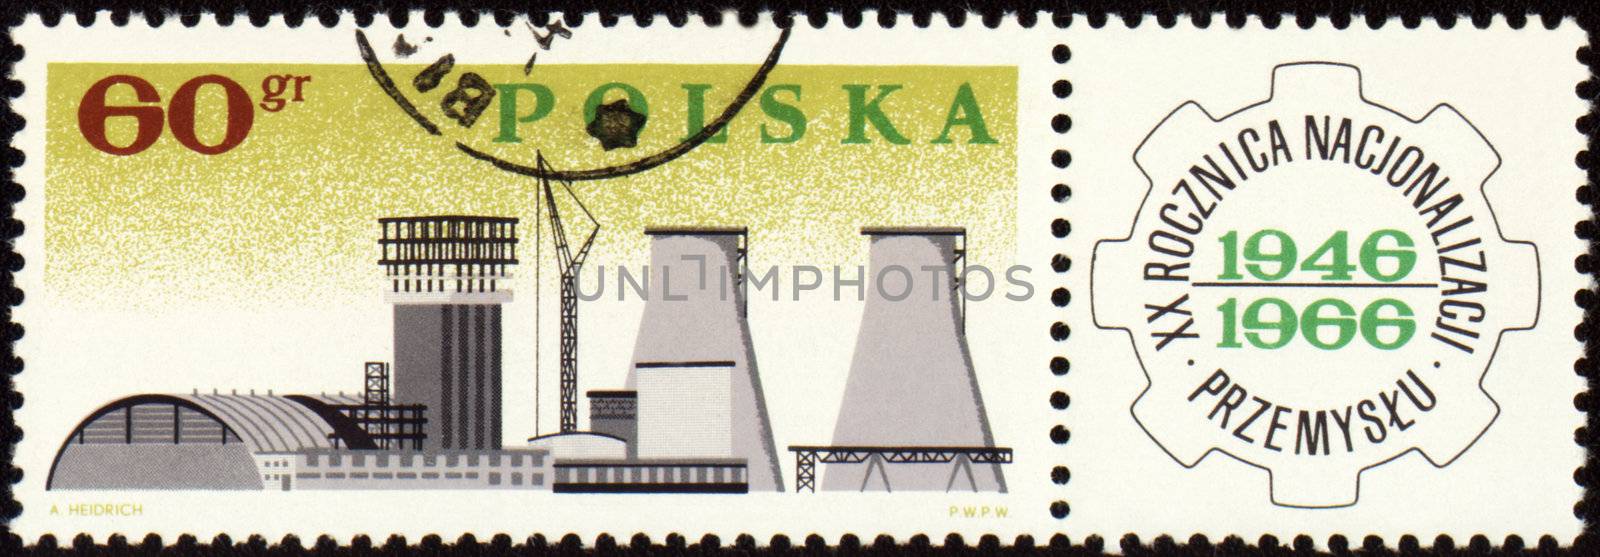 POLAND - CIRCA 1966: a stamp printed in Poland, shows big plant, devoted to the nationalization of Polish industry, circa 1966